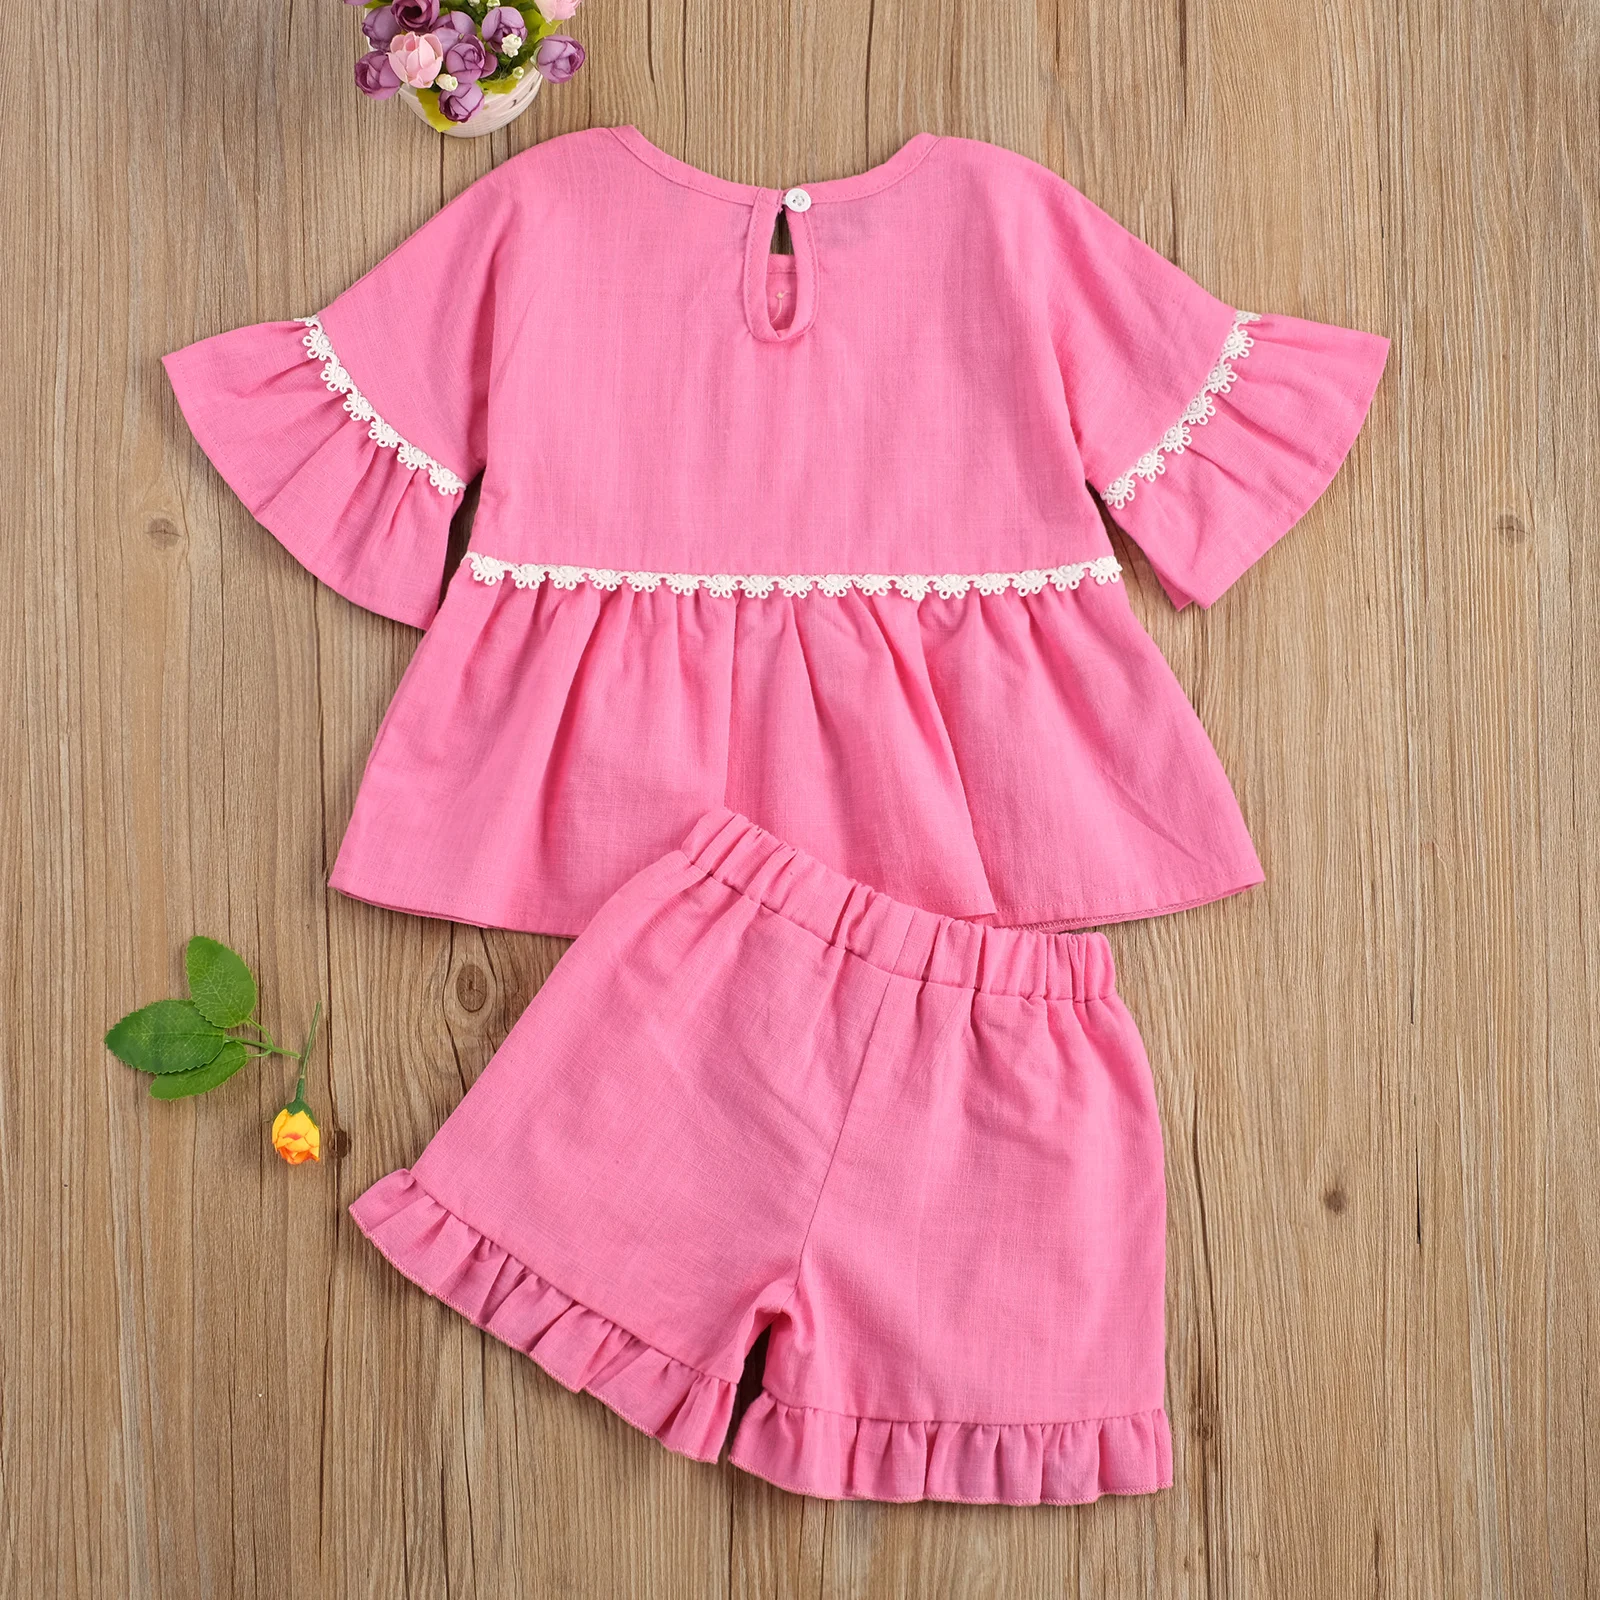 

2020 New Summer 12M-5Y Toddler Kids Baby Girl 2Pcs Set Dress-Style Lace Decorate Flared Half Sleeve Buttons Top+Ruffled Shorts